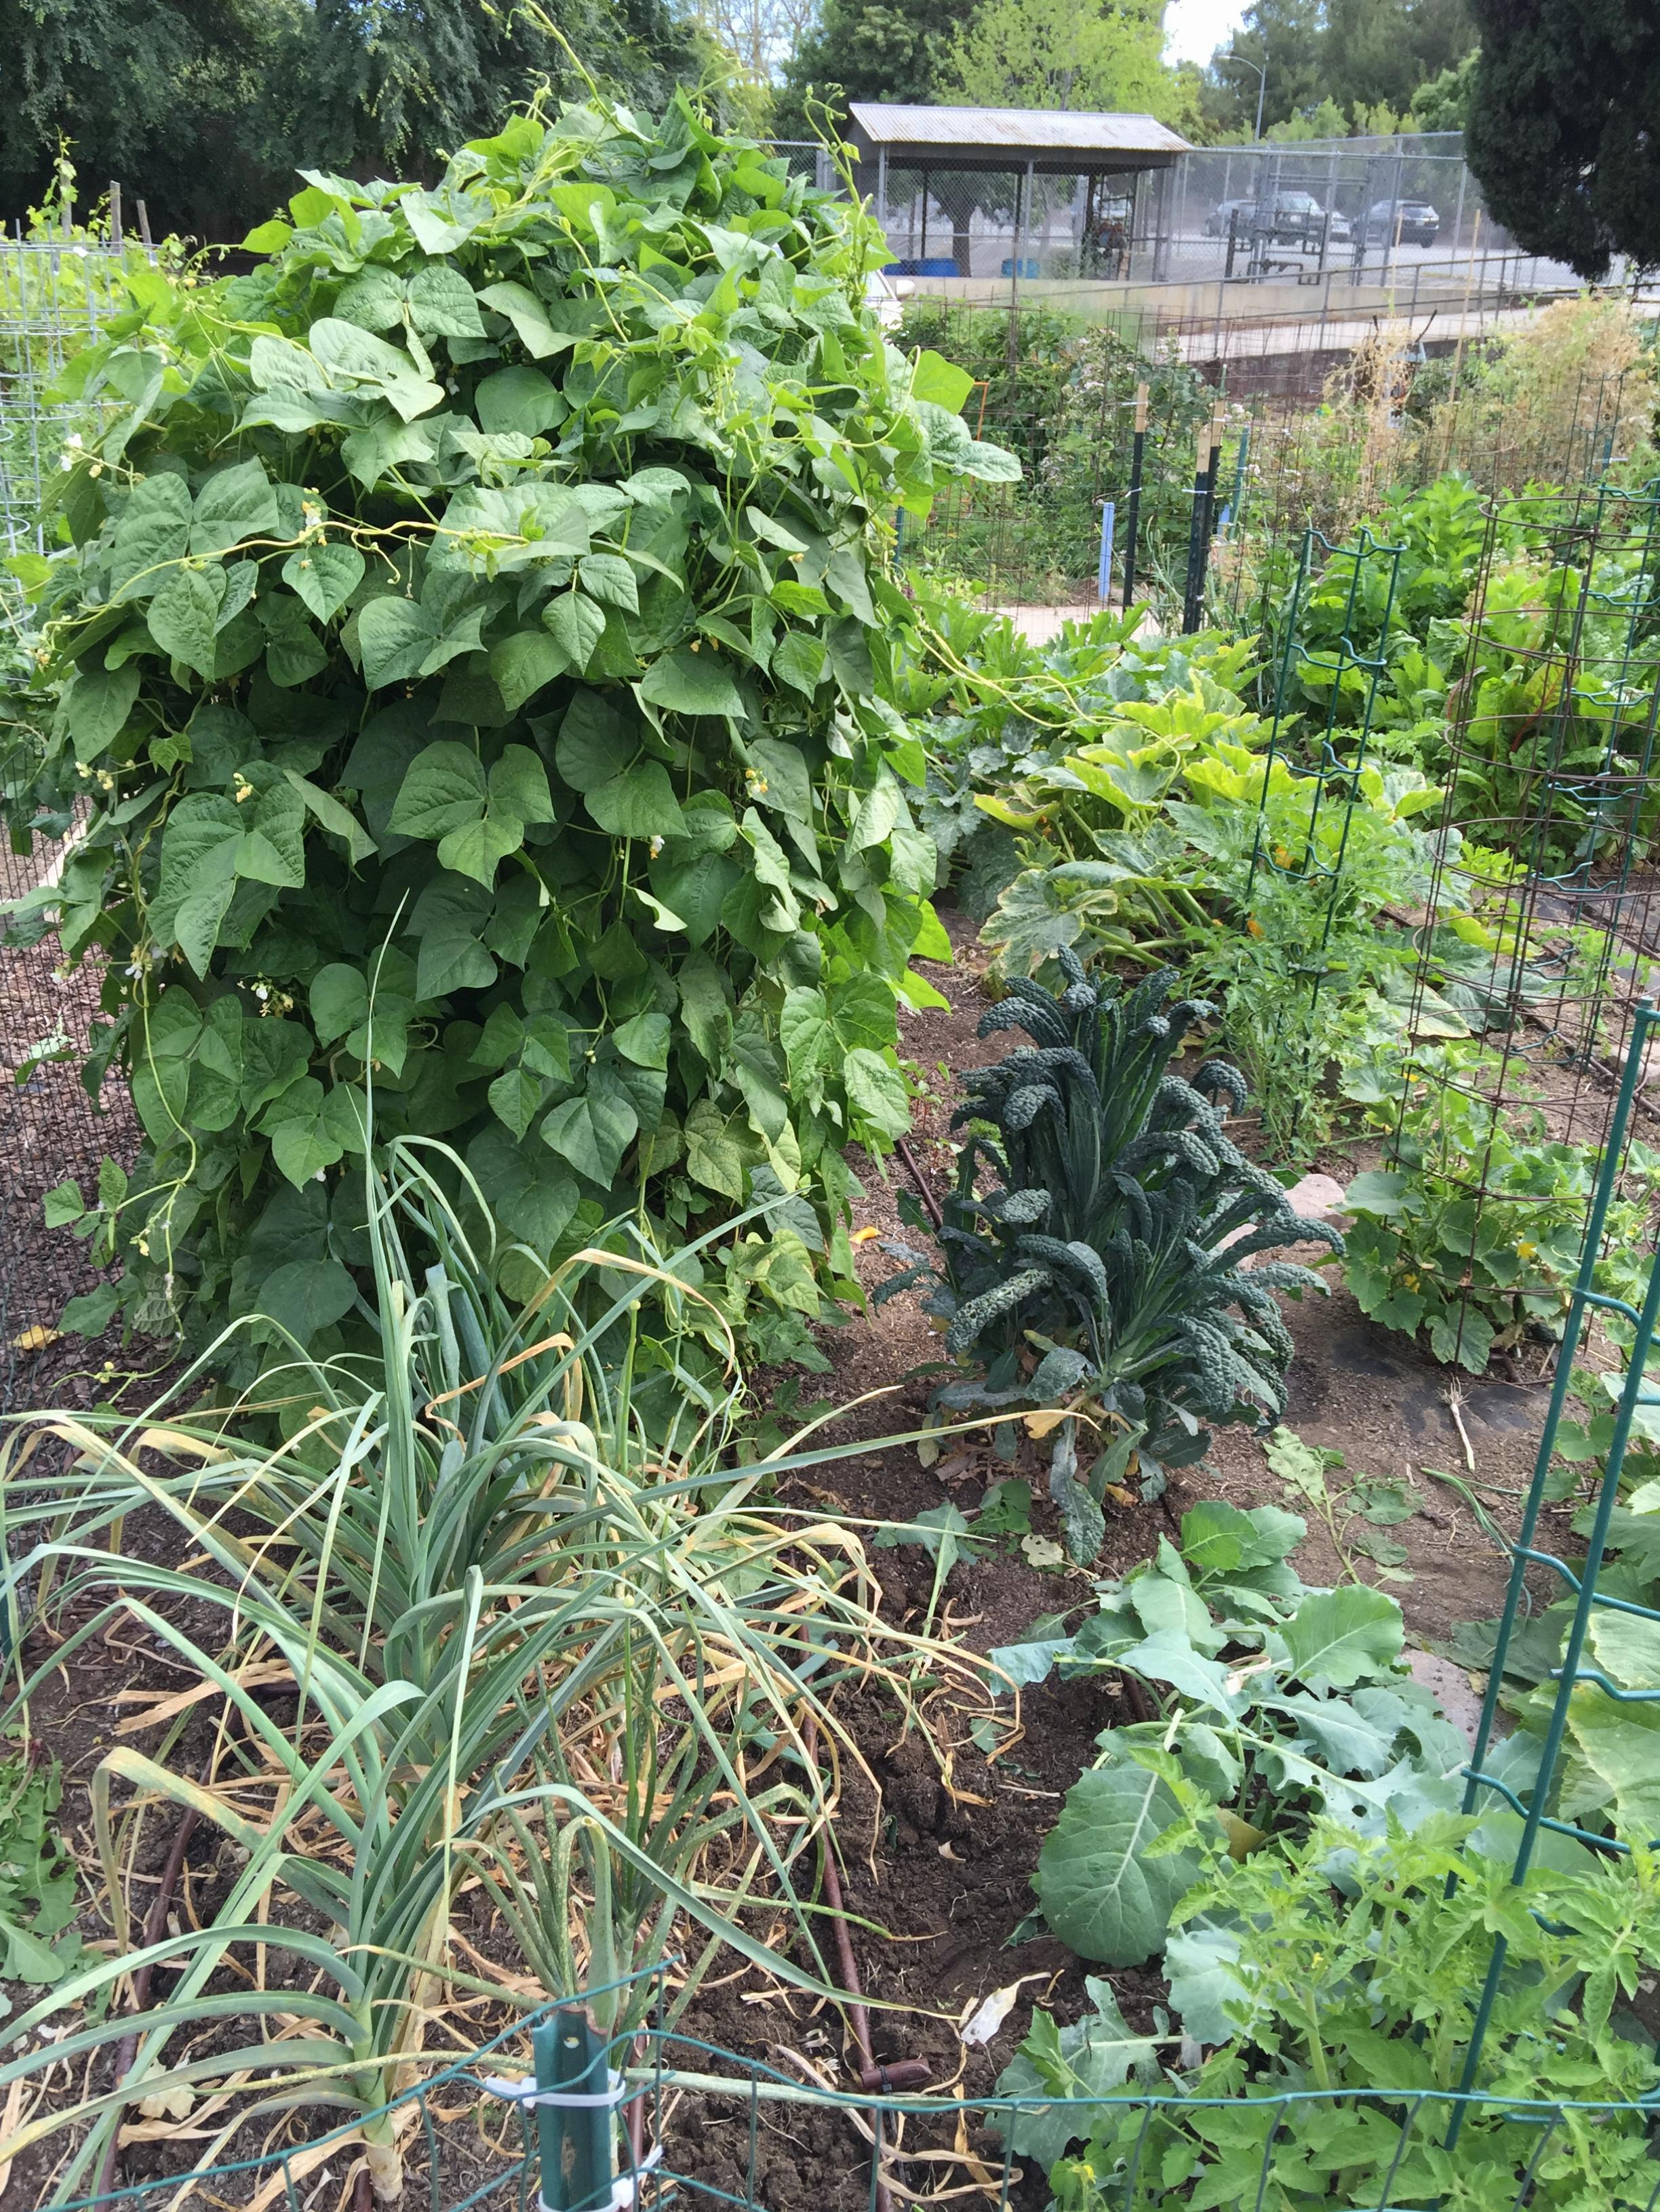 Pole beans blooming and setting beans